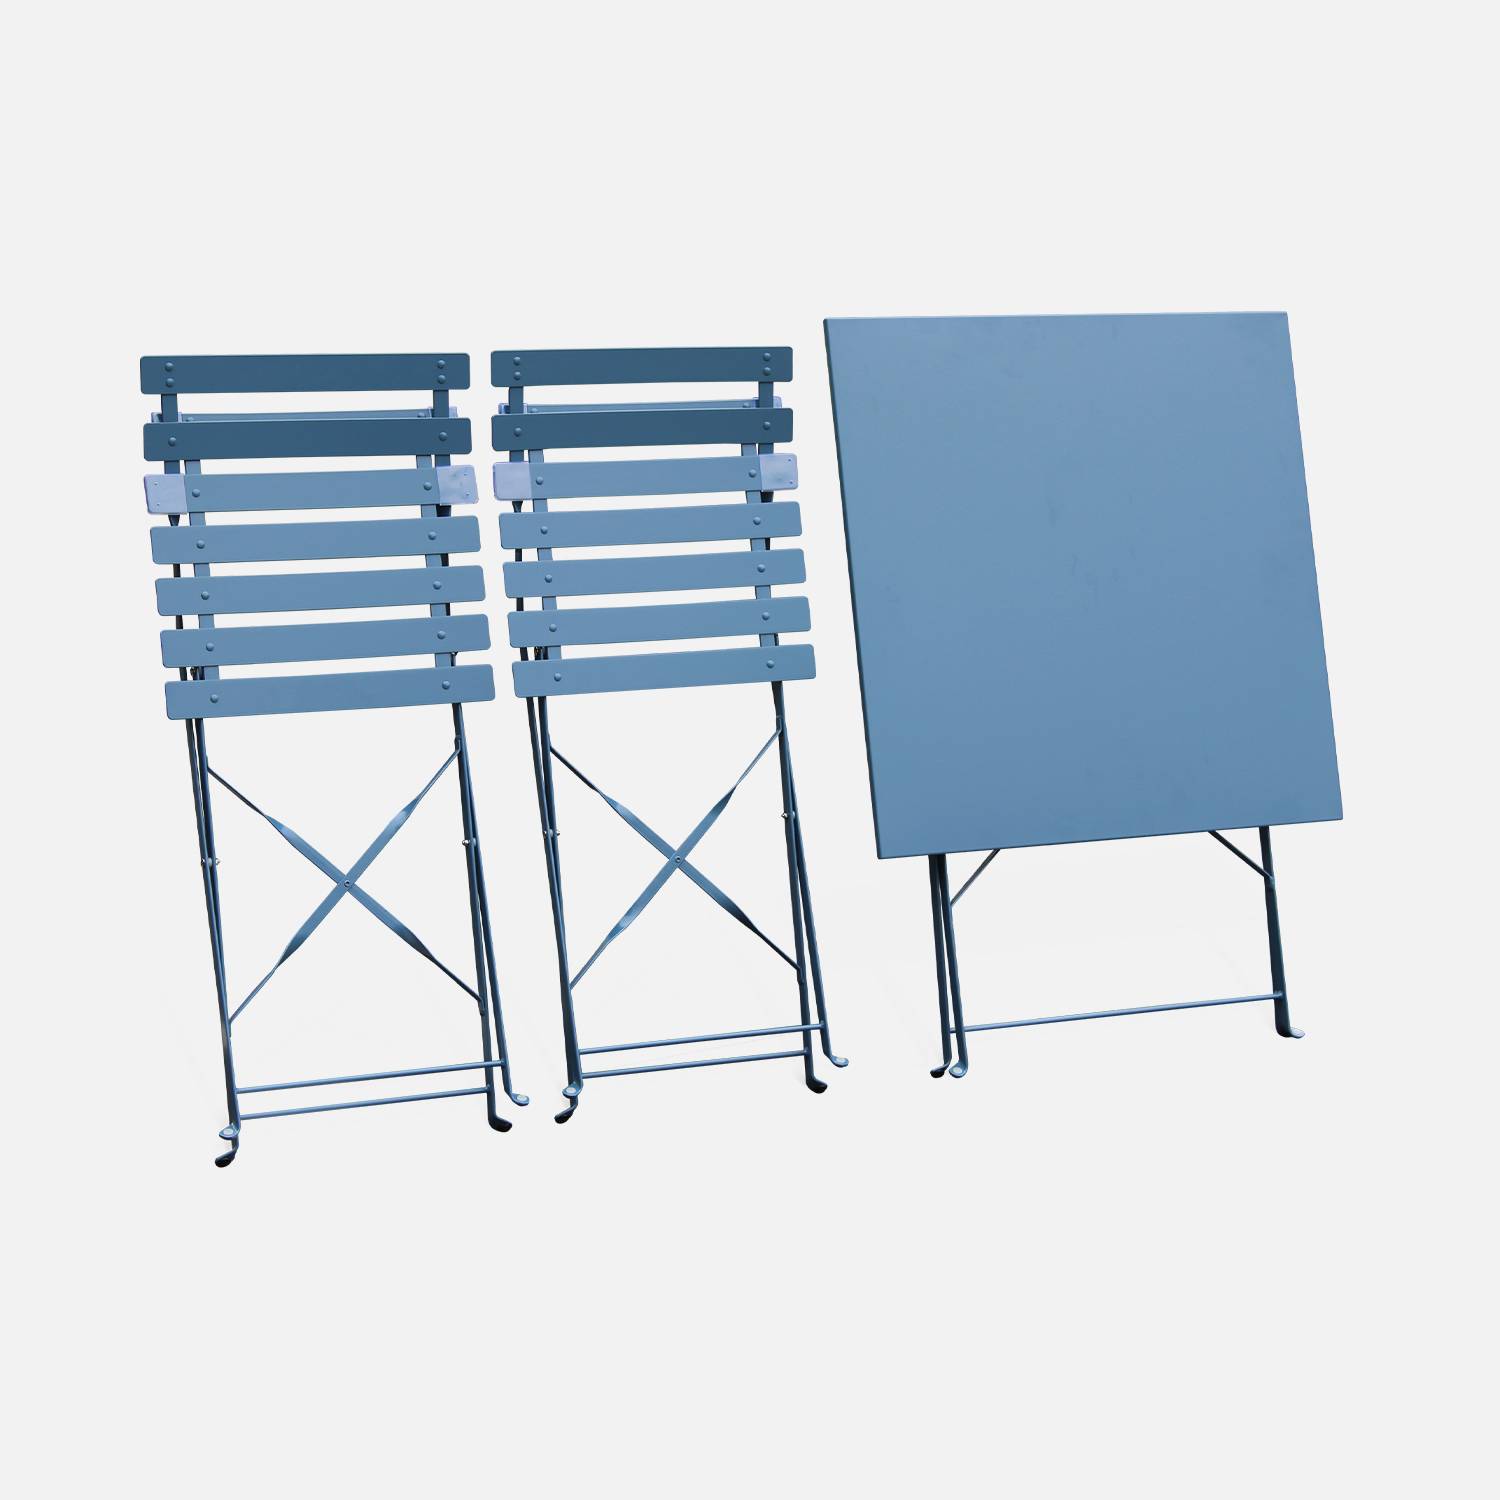 2-seater foldable thermo-lacquered steel bistro garden table with chairs, 70x70cm - Emilia - Grey Blue,sweeek,Photo6